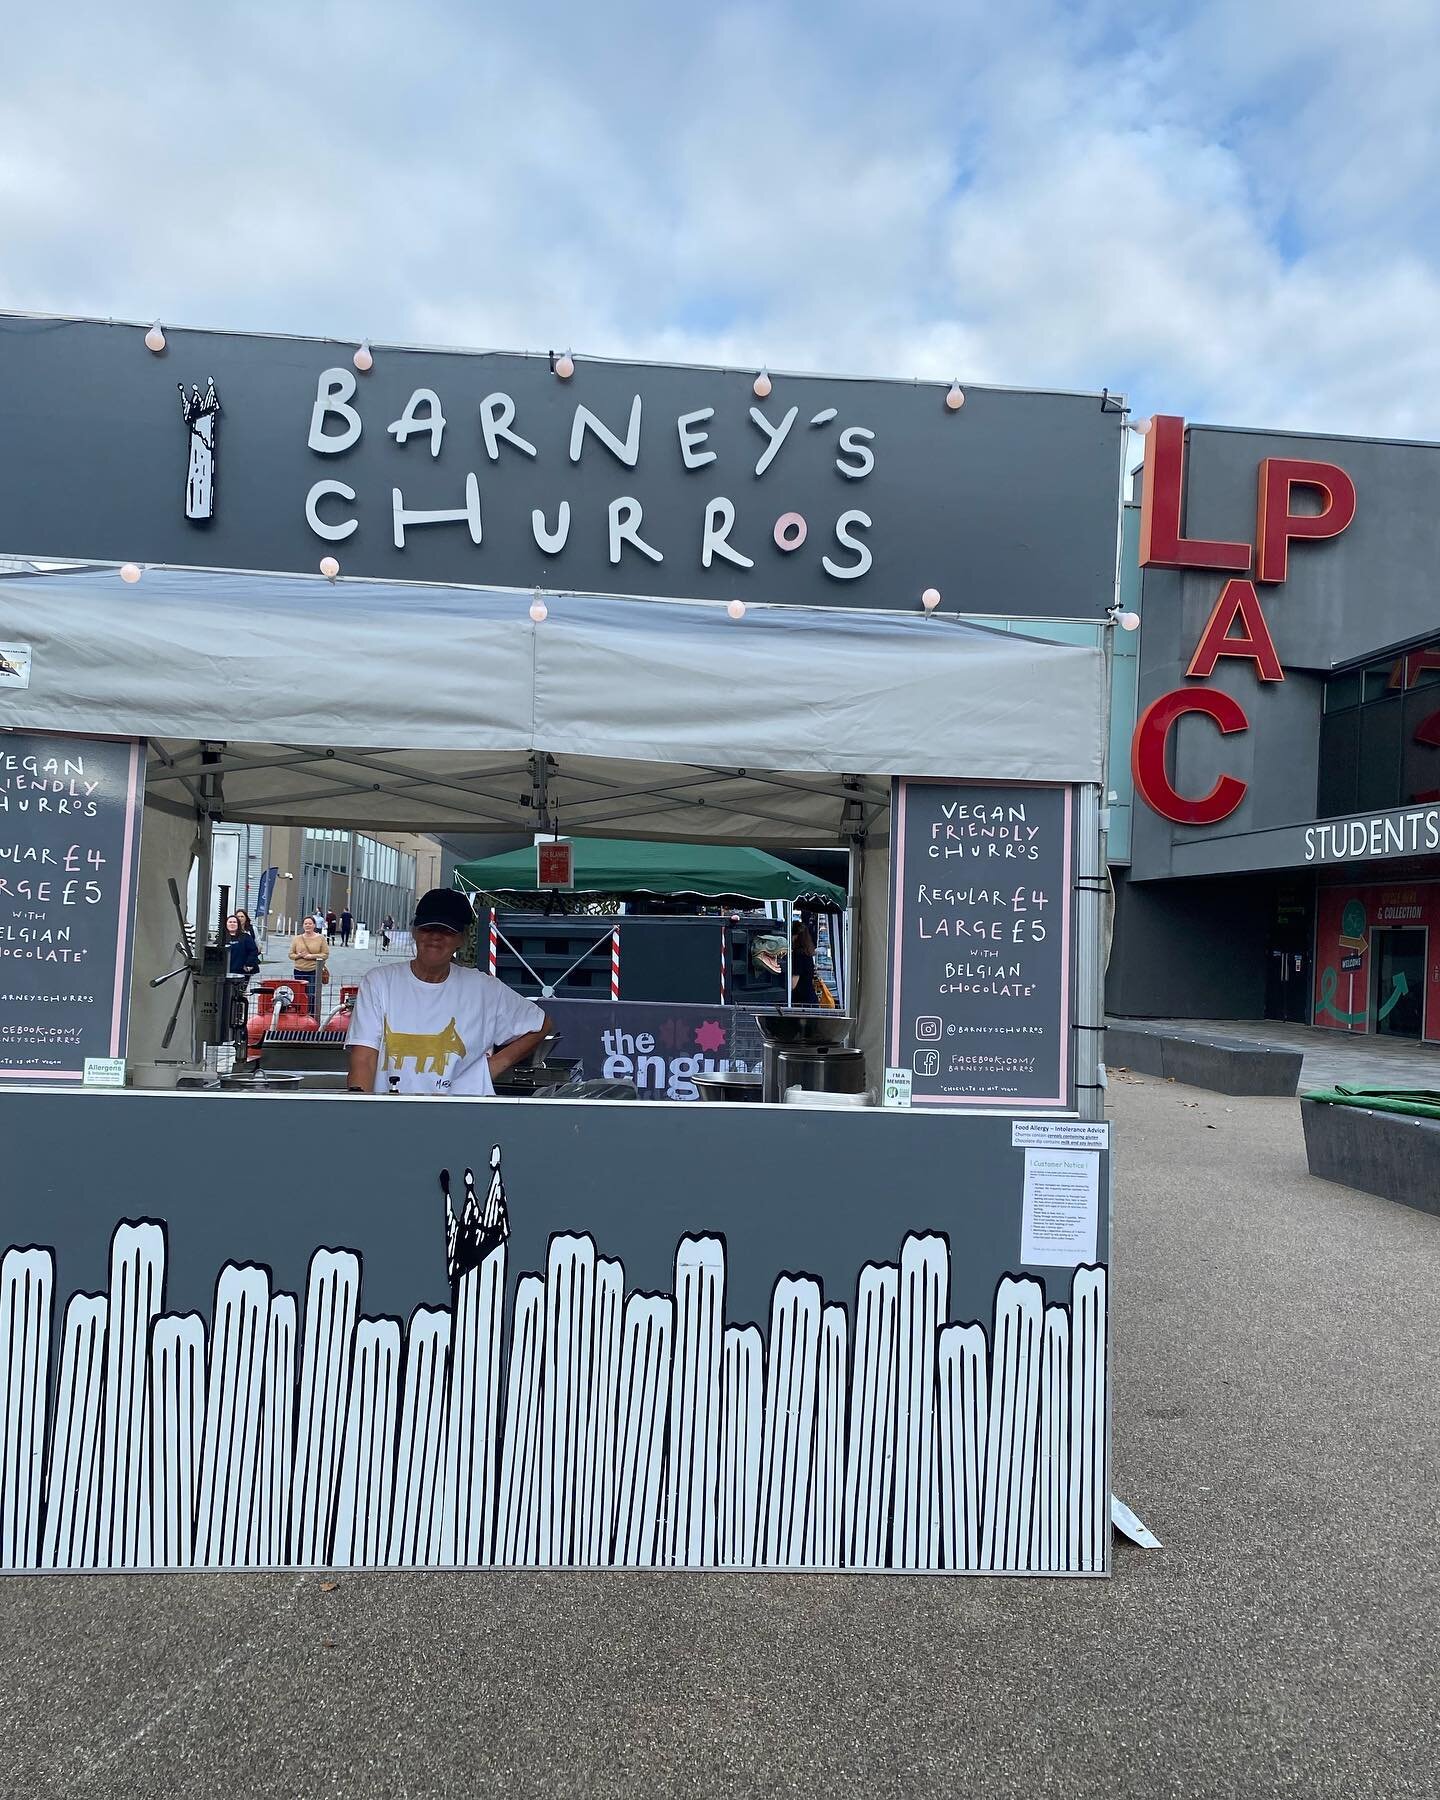 Lincoln&rsquo;s own Comic Con today! 

Churros is being served outside the Engine Shed so even if you&rsquo;re not brave enough to put your Cos Play on, there is still CHURROS waiting for you! 

#BarneysChurros